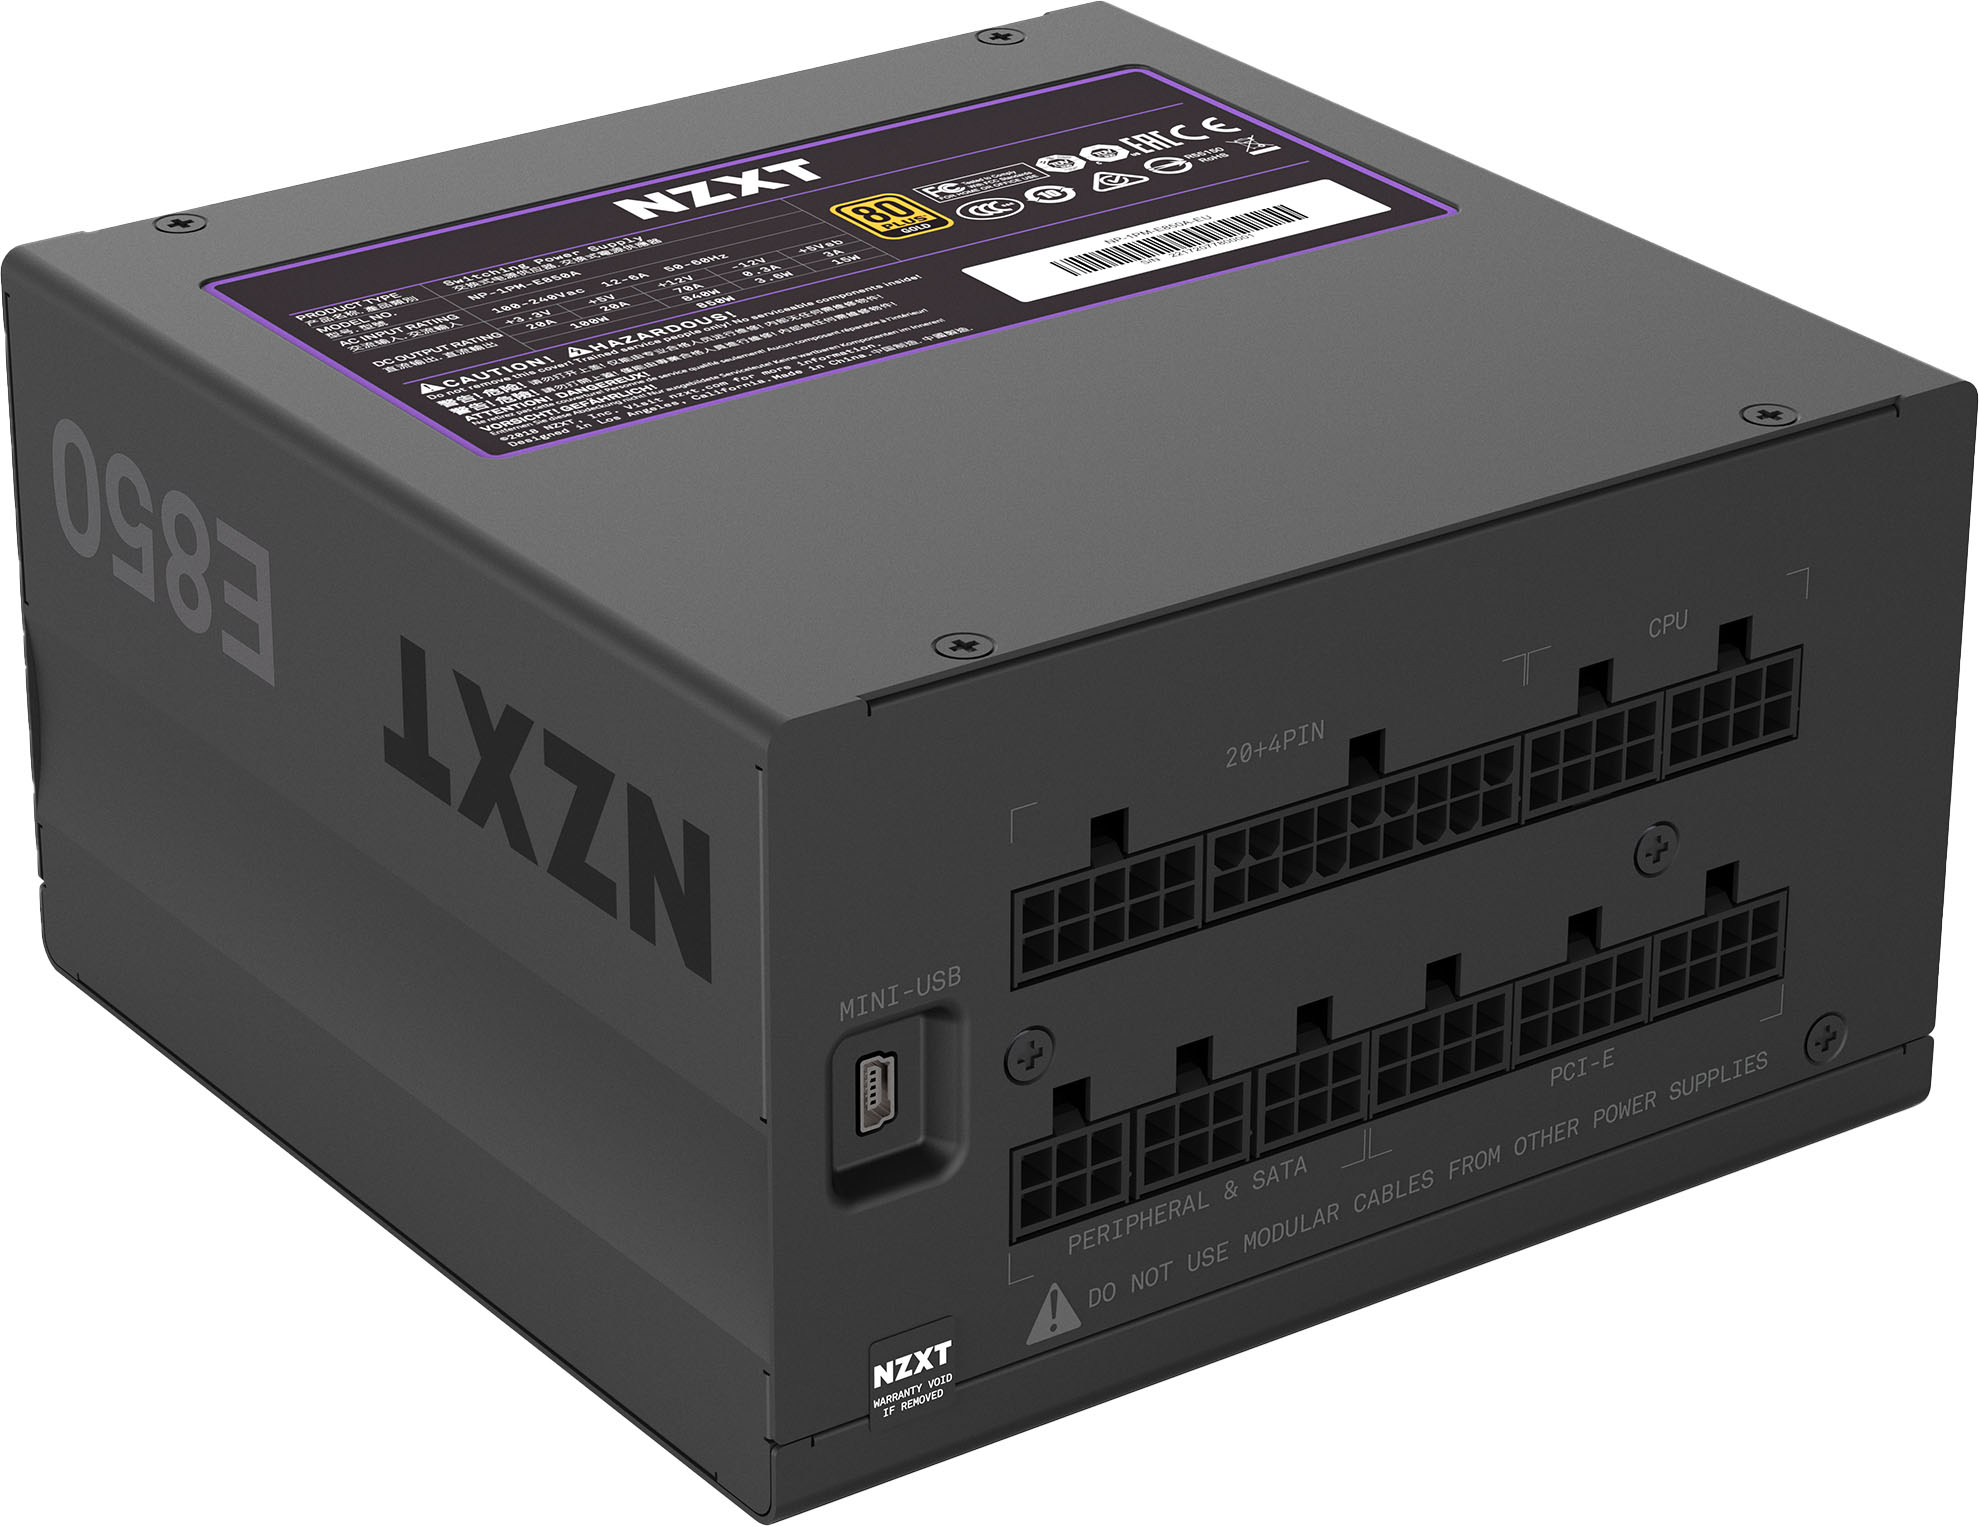 NZXT E850 ATX Gaming Smart Power Supply NP-1PM-E850A-US - Best Buy